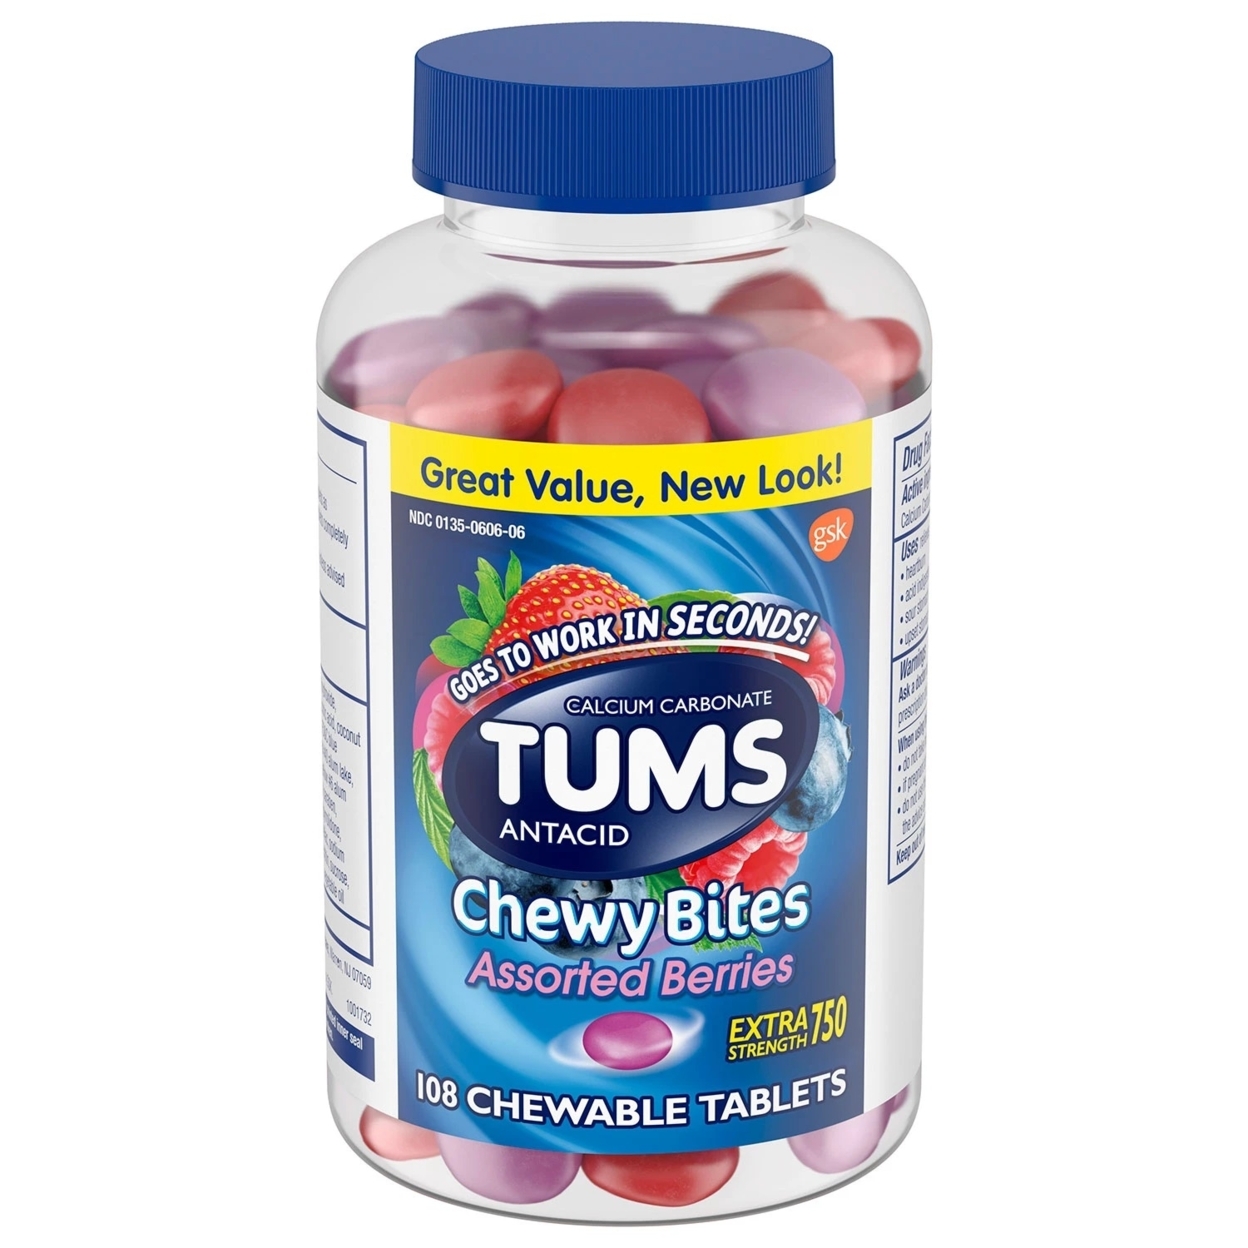 TUMS Chewy Bites Antacid Tablets For Heartburn Relief, Assorted Berries (108 Ct)